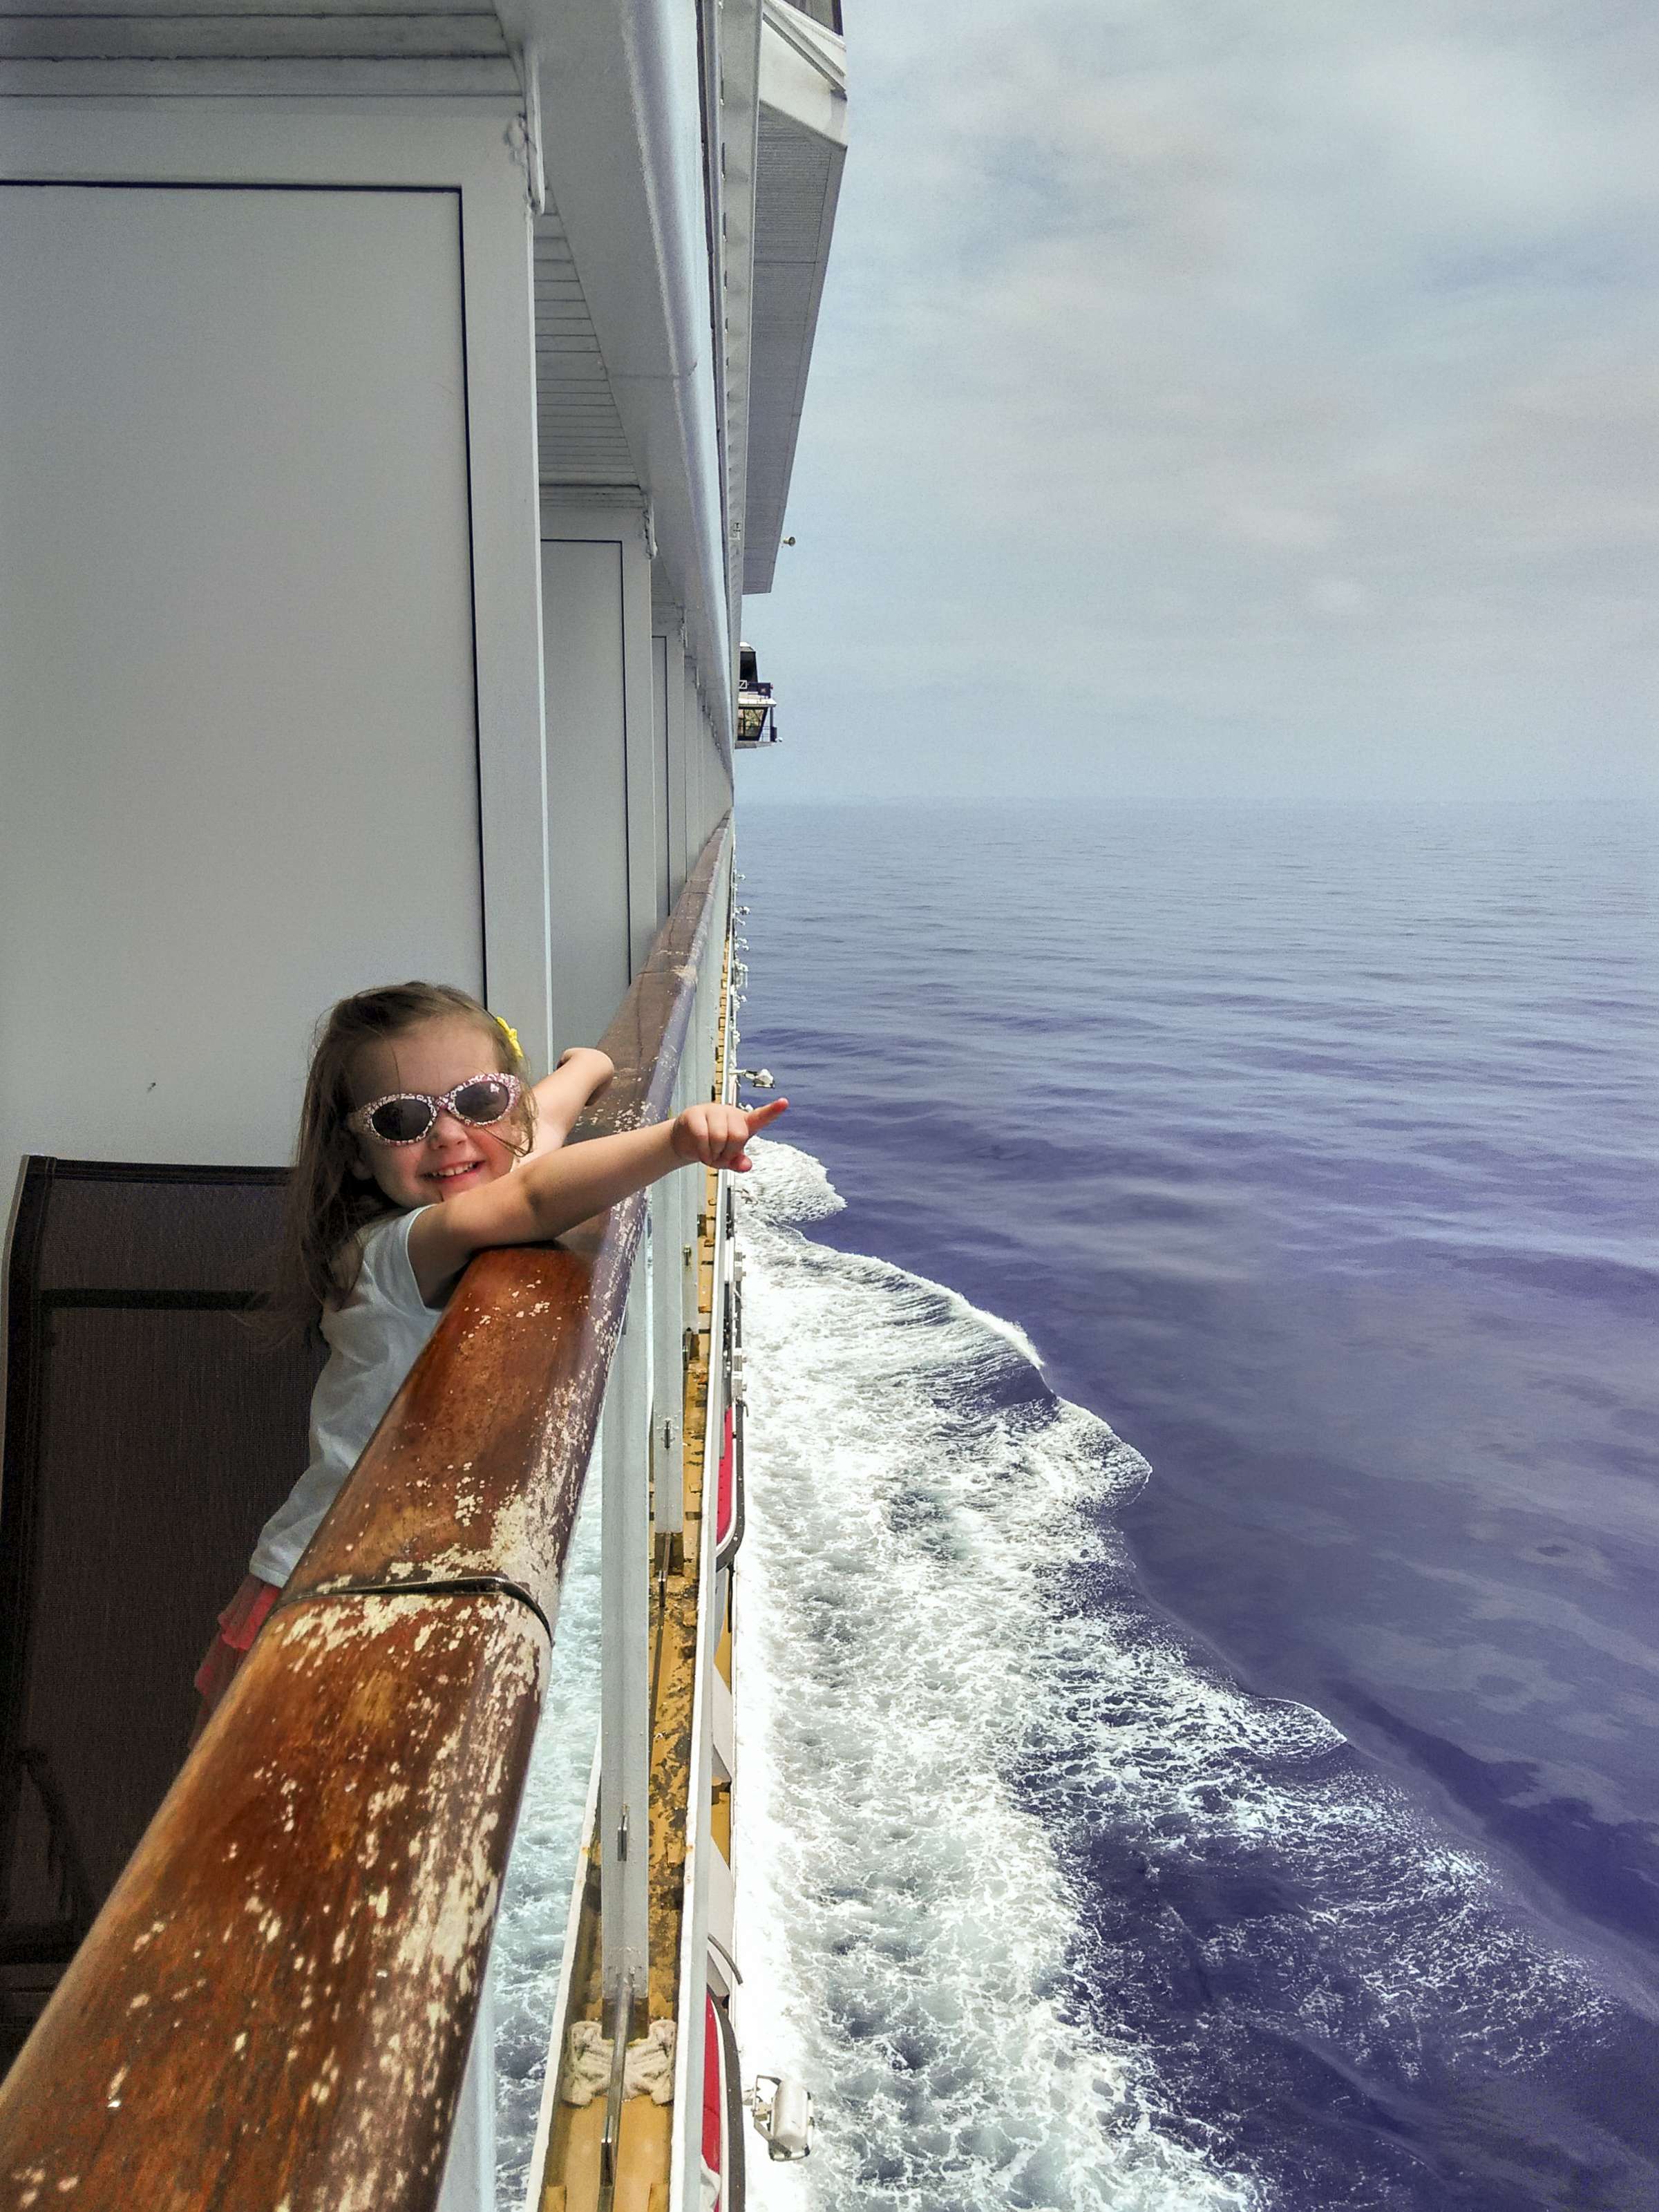 Endless kids’ activities, a ship so big it’s like a floating land mass, no luggage weight limits – and wait till you step ashore in Okinawa, with its sparkling seas, temples and snakeskin guitar bands